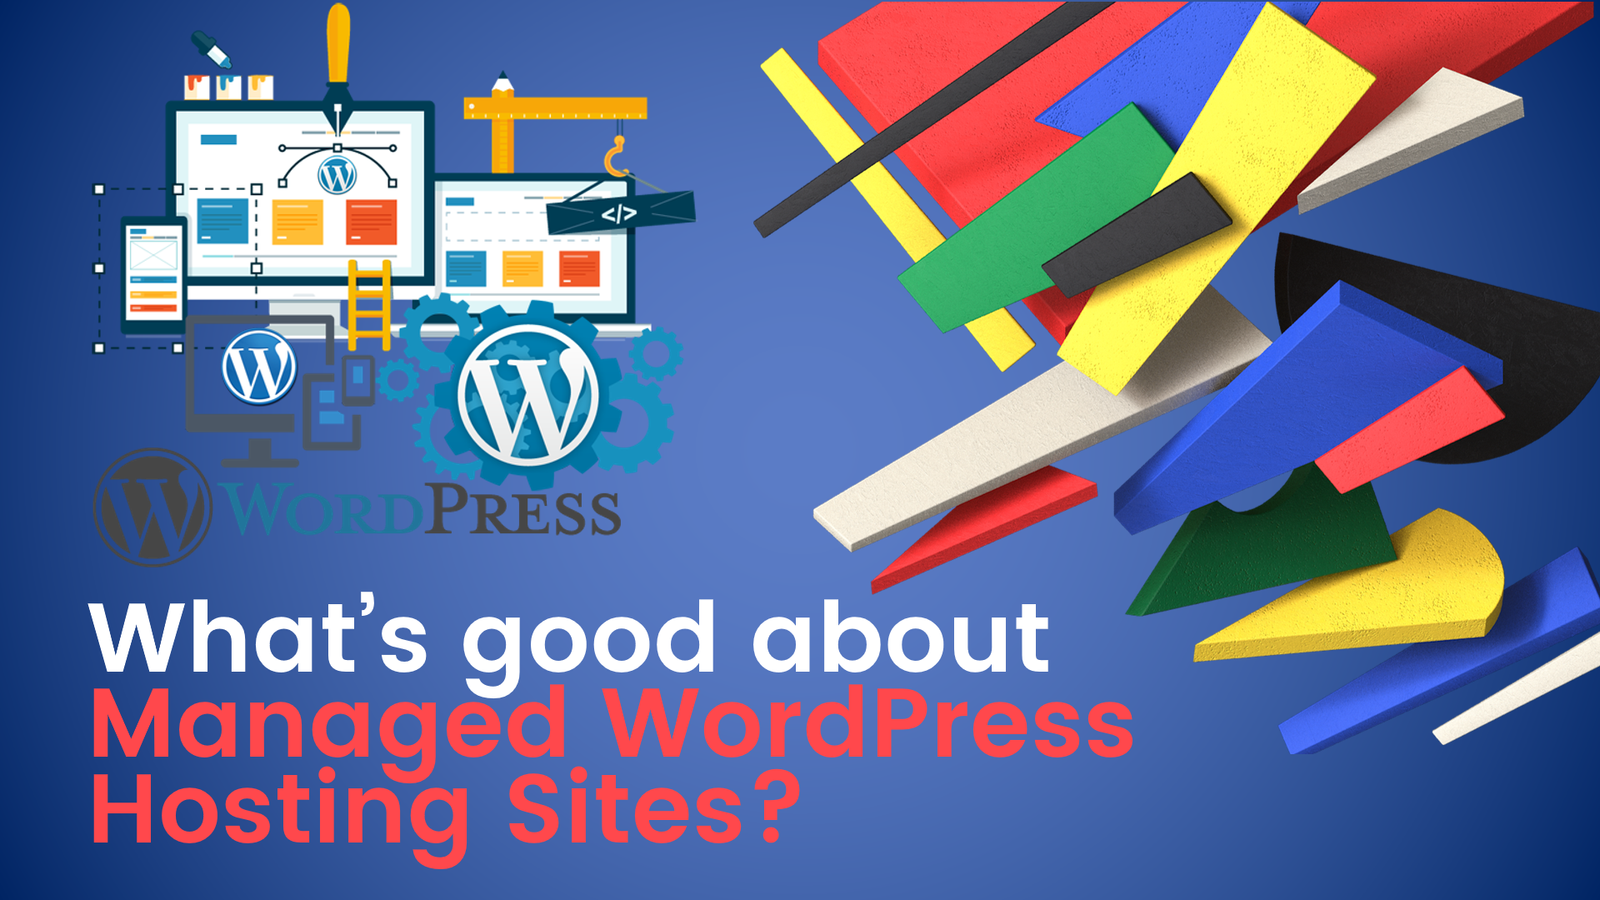 What’s good about Managed WordPress Hosting Sites?